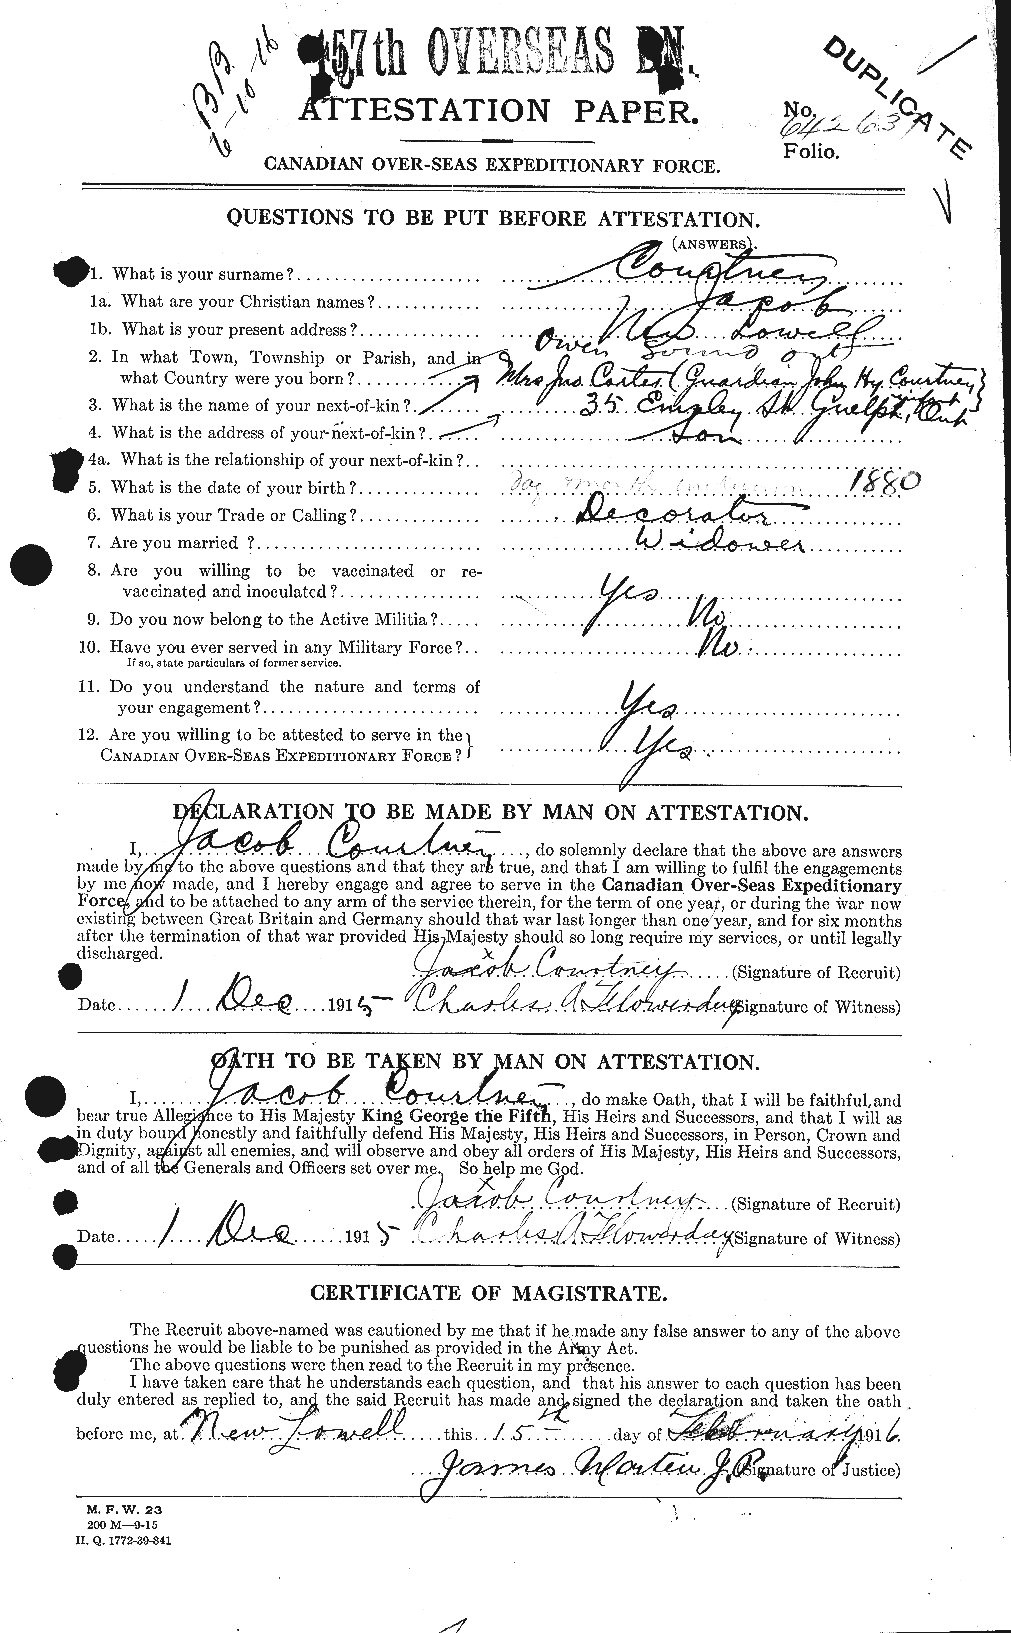 Personnel Records of the First World War - CEF 059126a